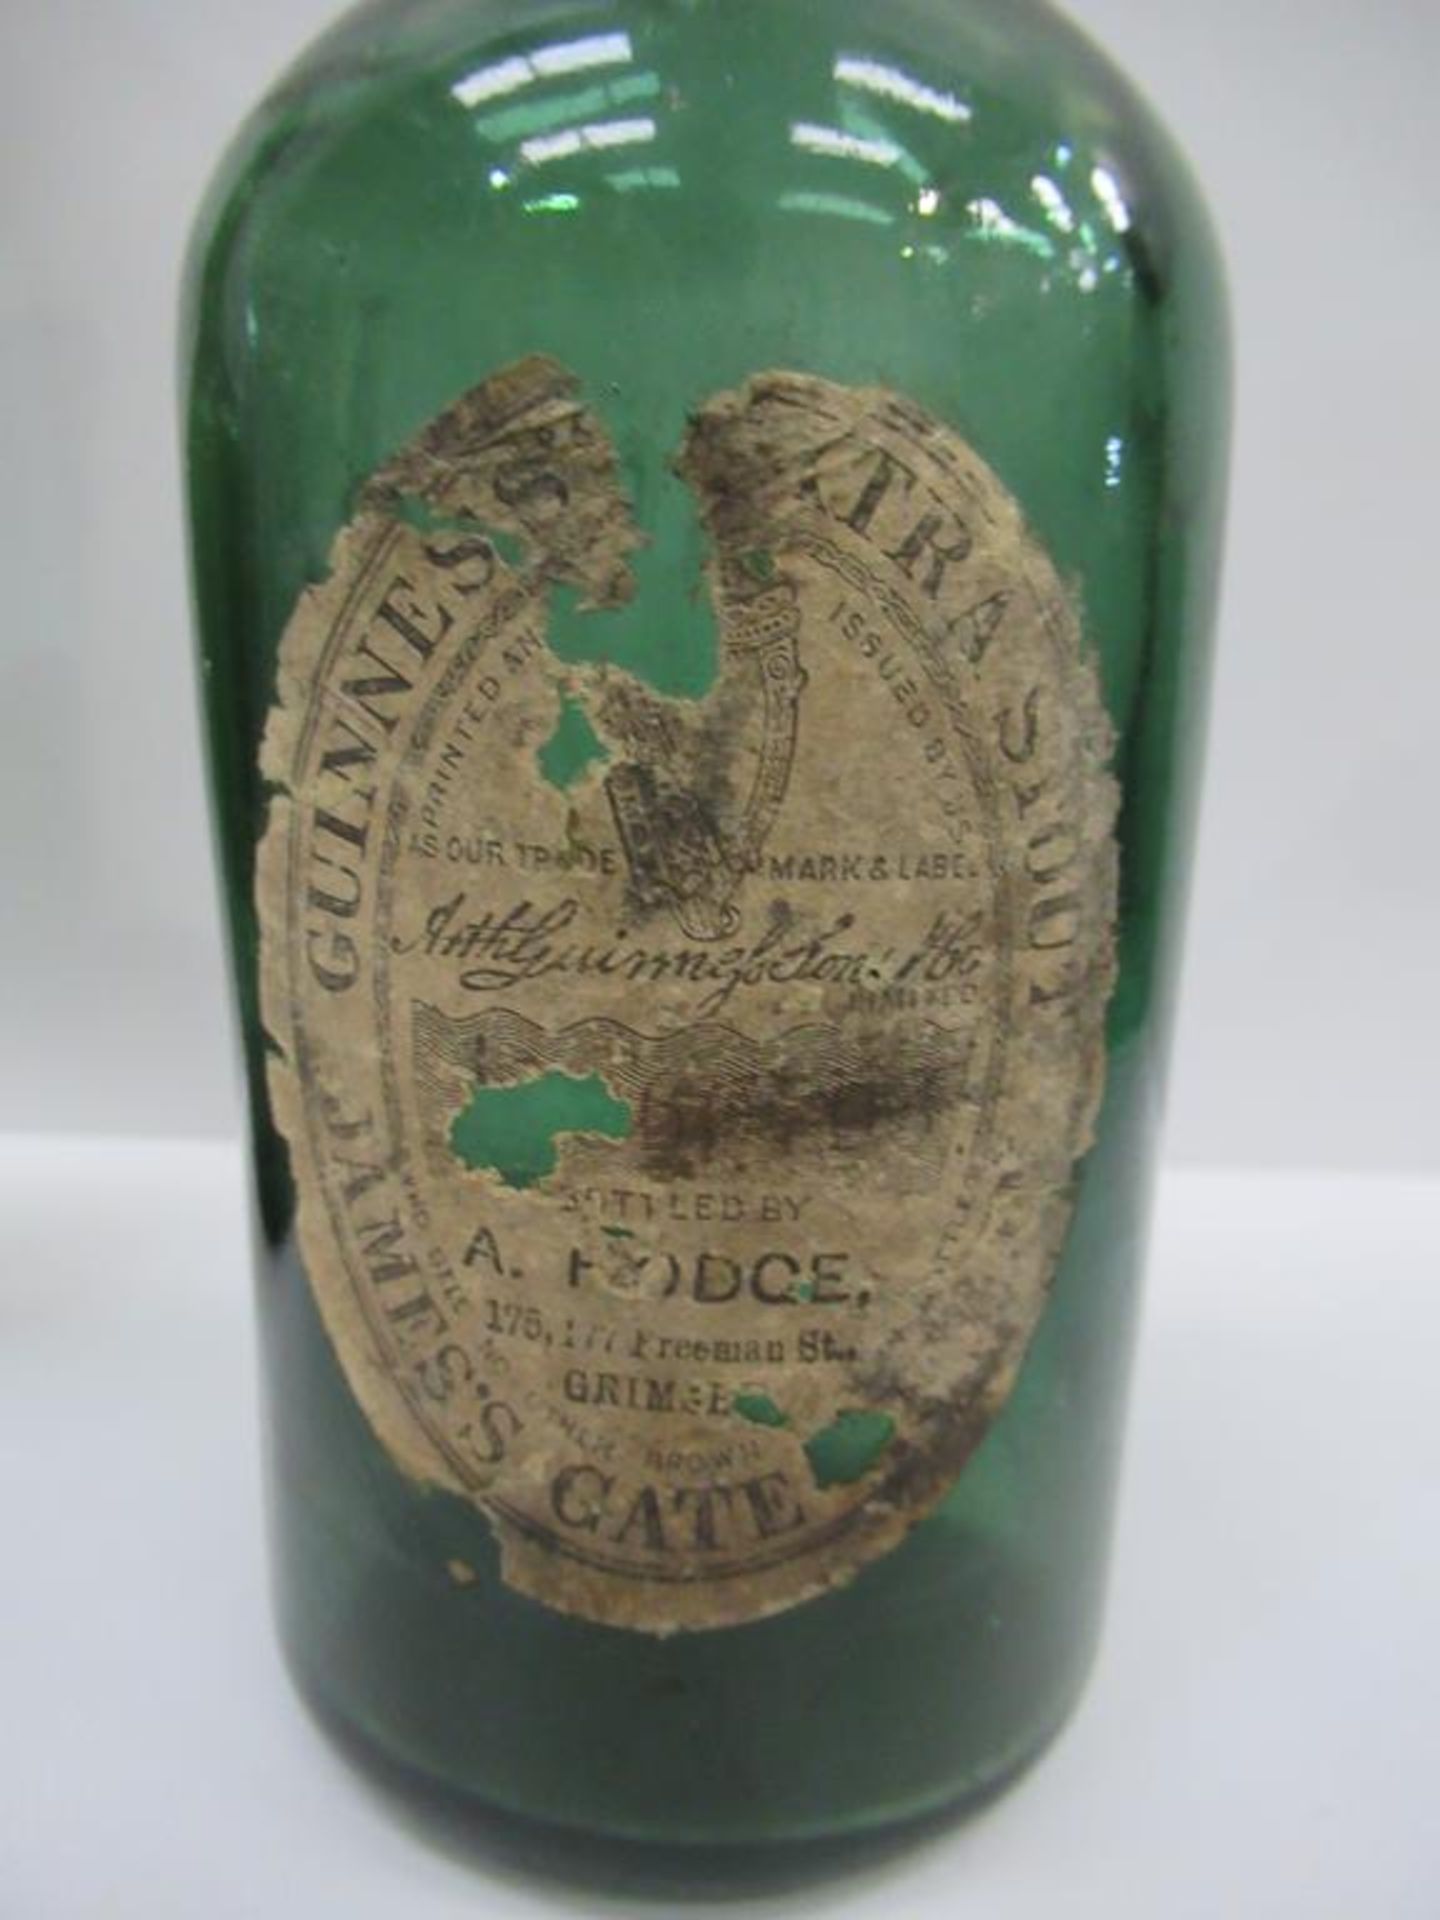 10x Grimsby A. Hodge Bottles- 2x coloured - Image 12 of 38